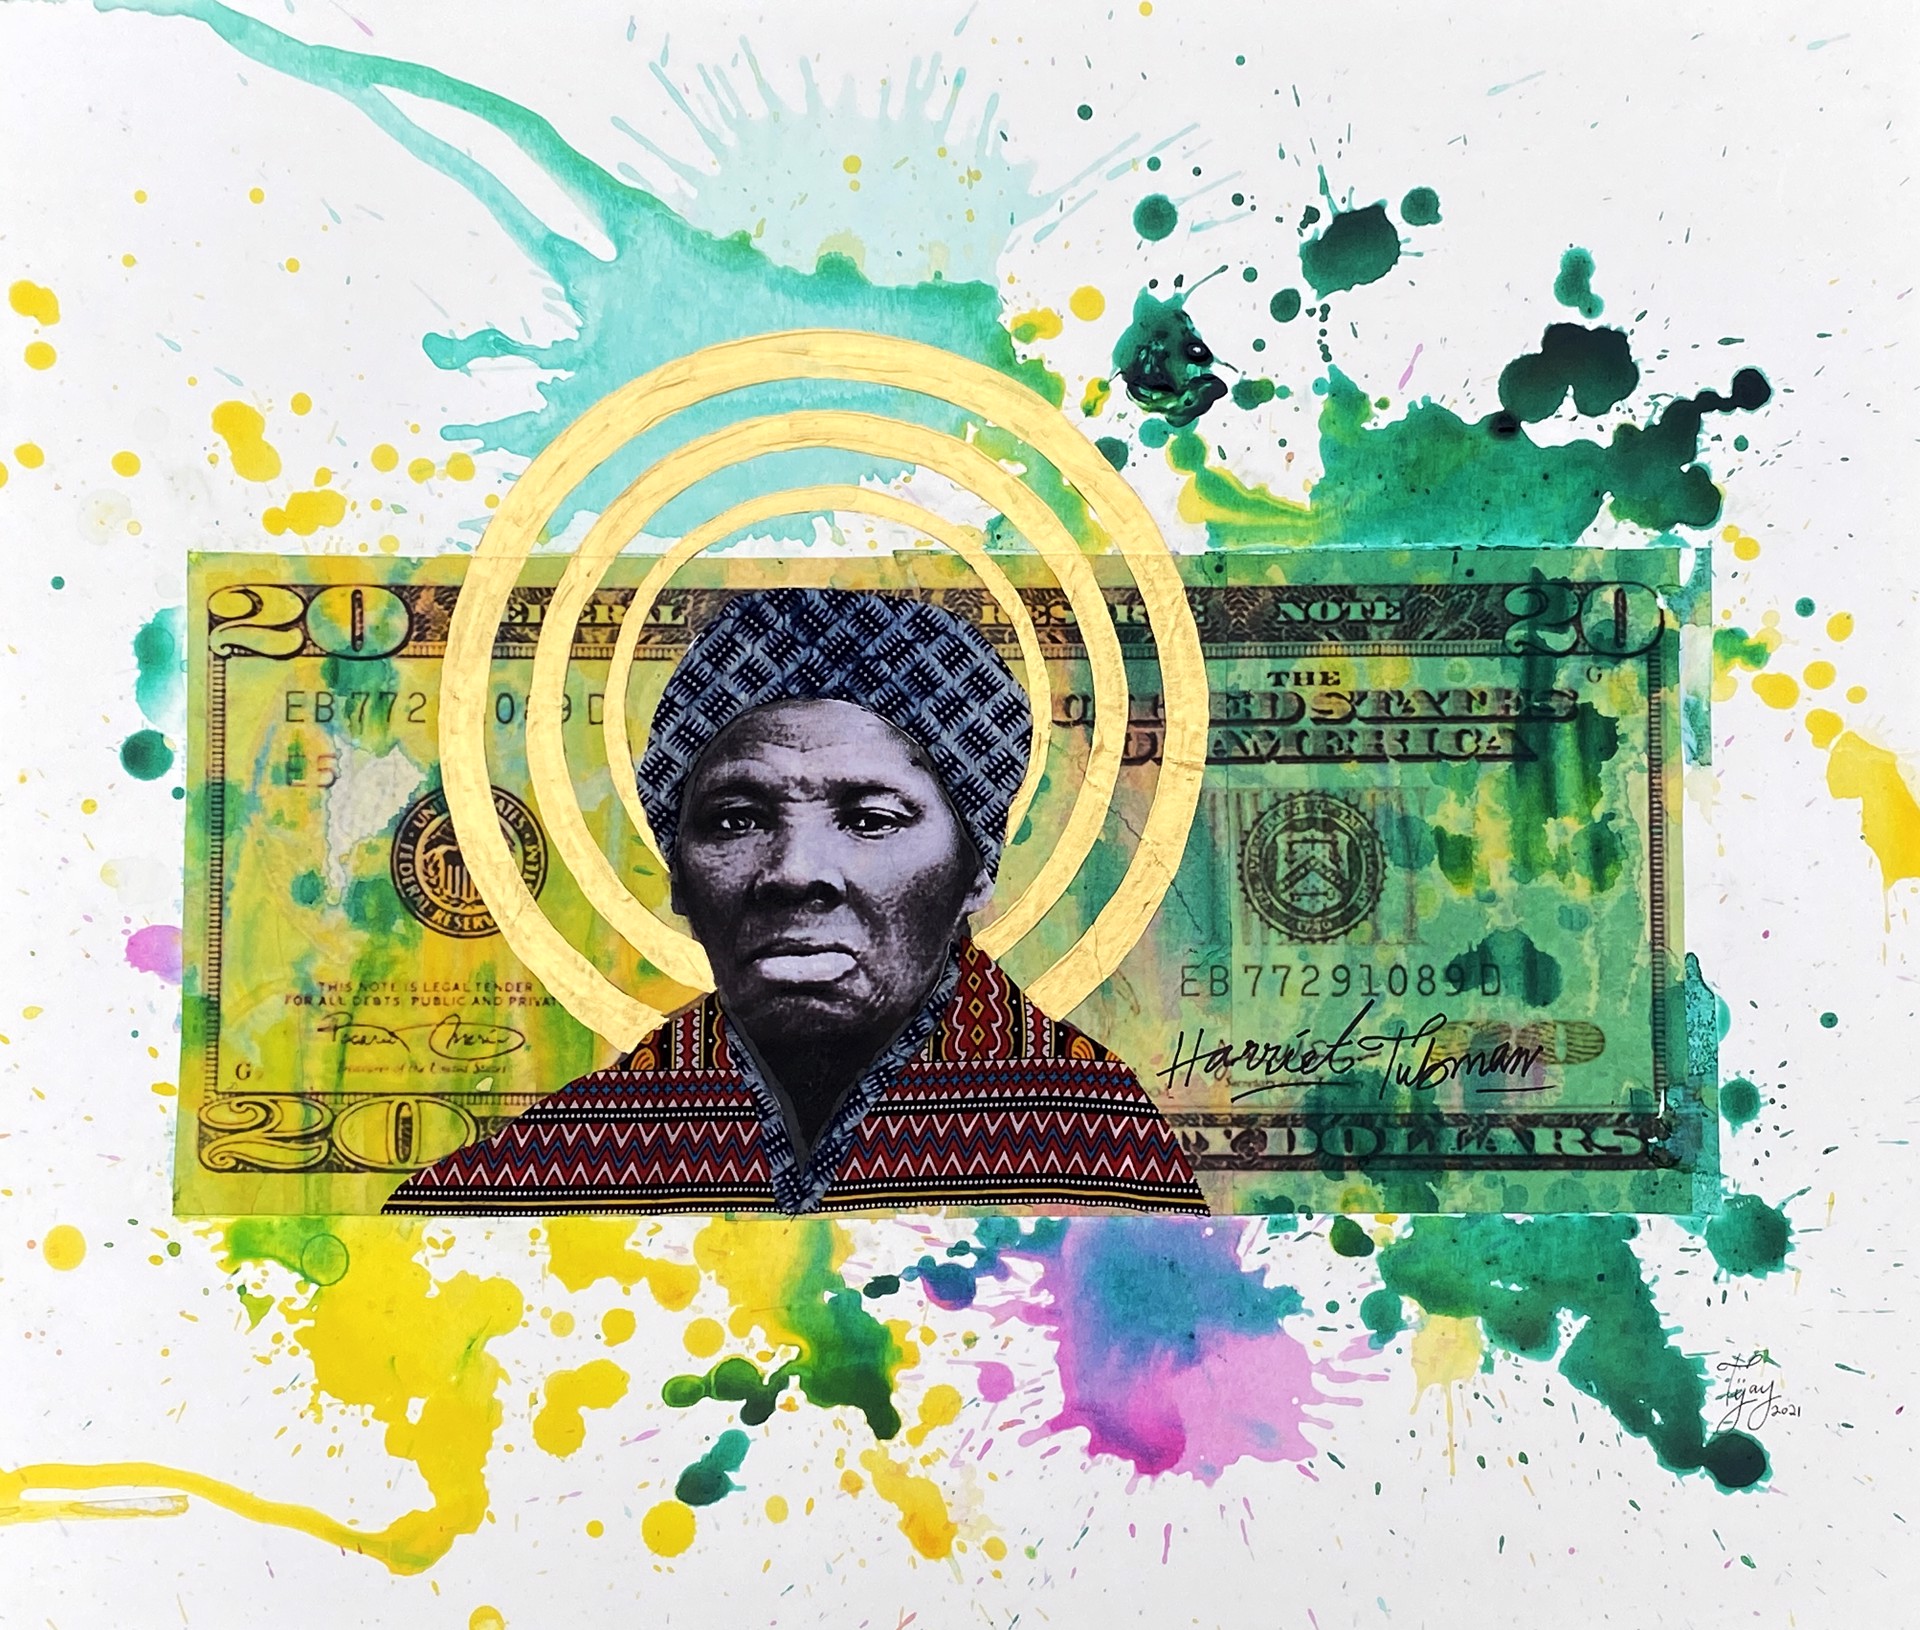 The Pride of Our Village, Harriet Tubman by Tijay Mohammed